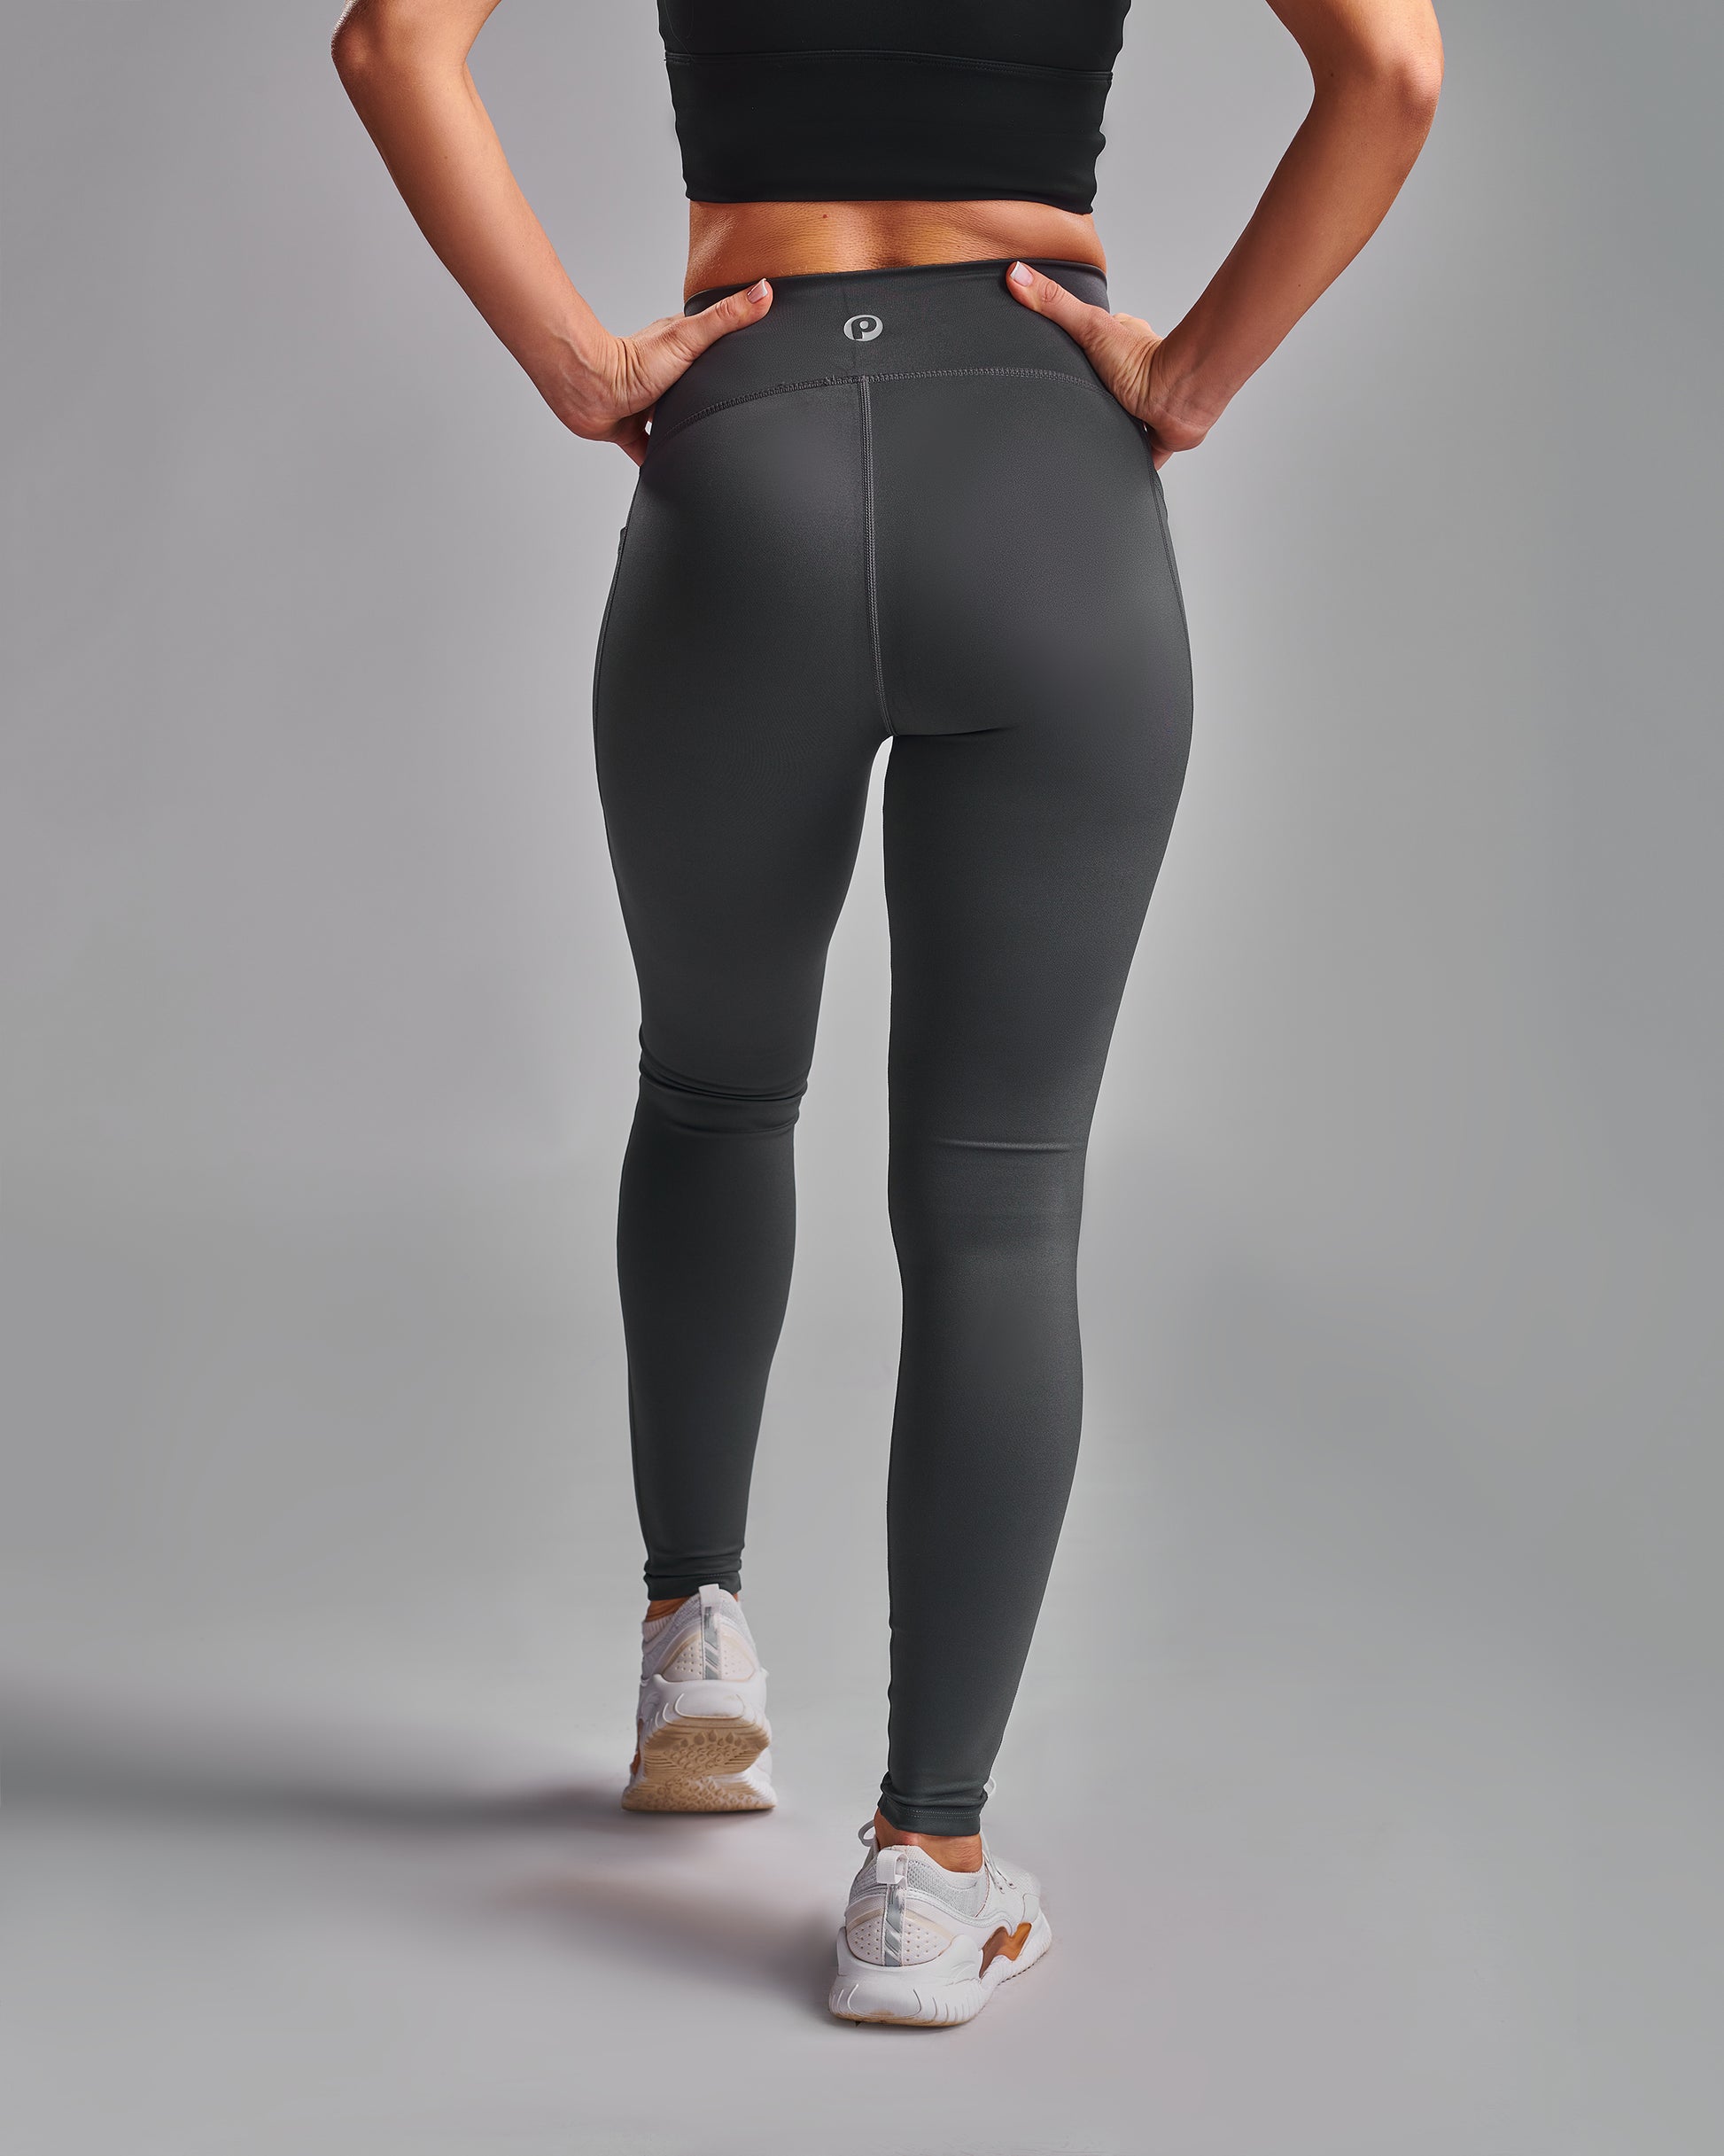 Align Leggings. Grey Ultralux fabric with side pockets